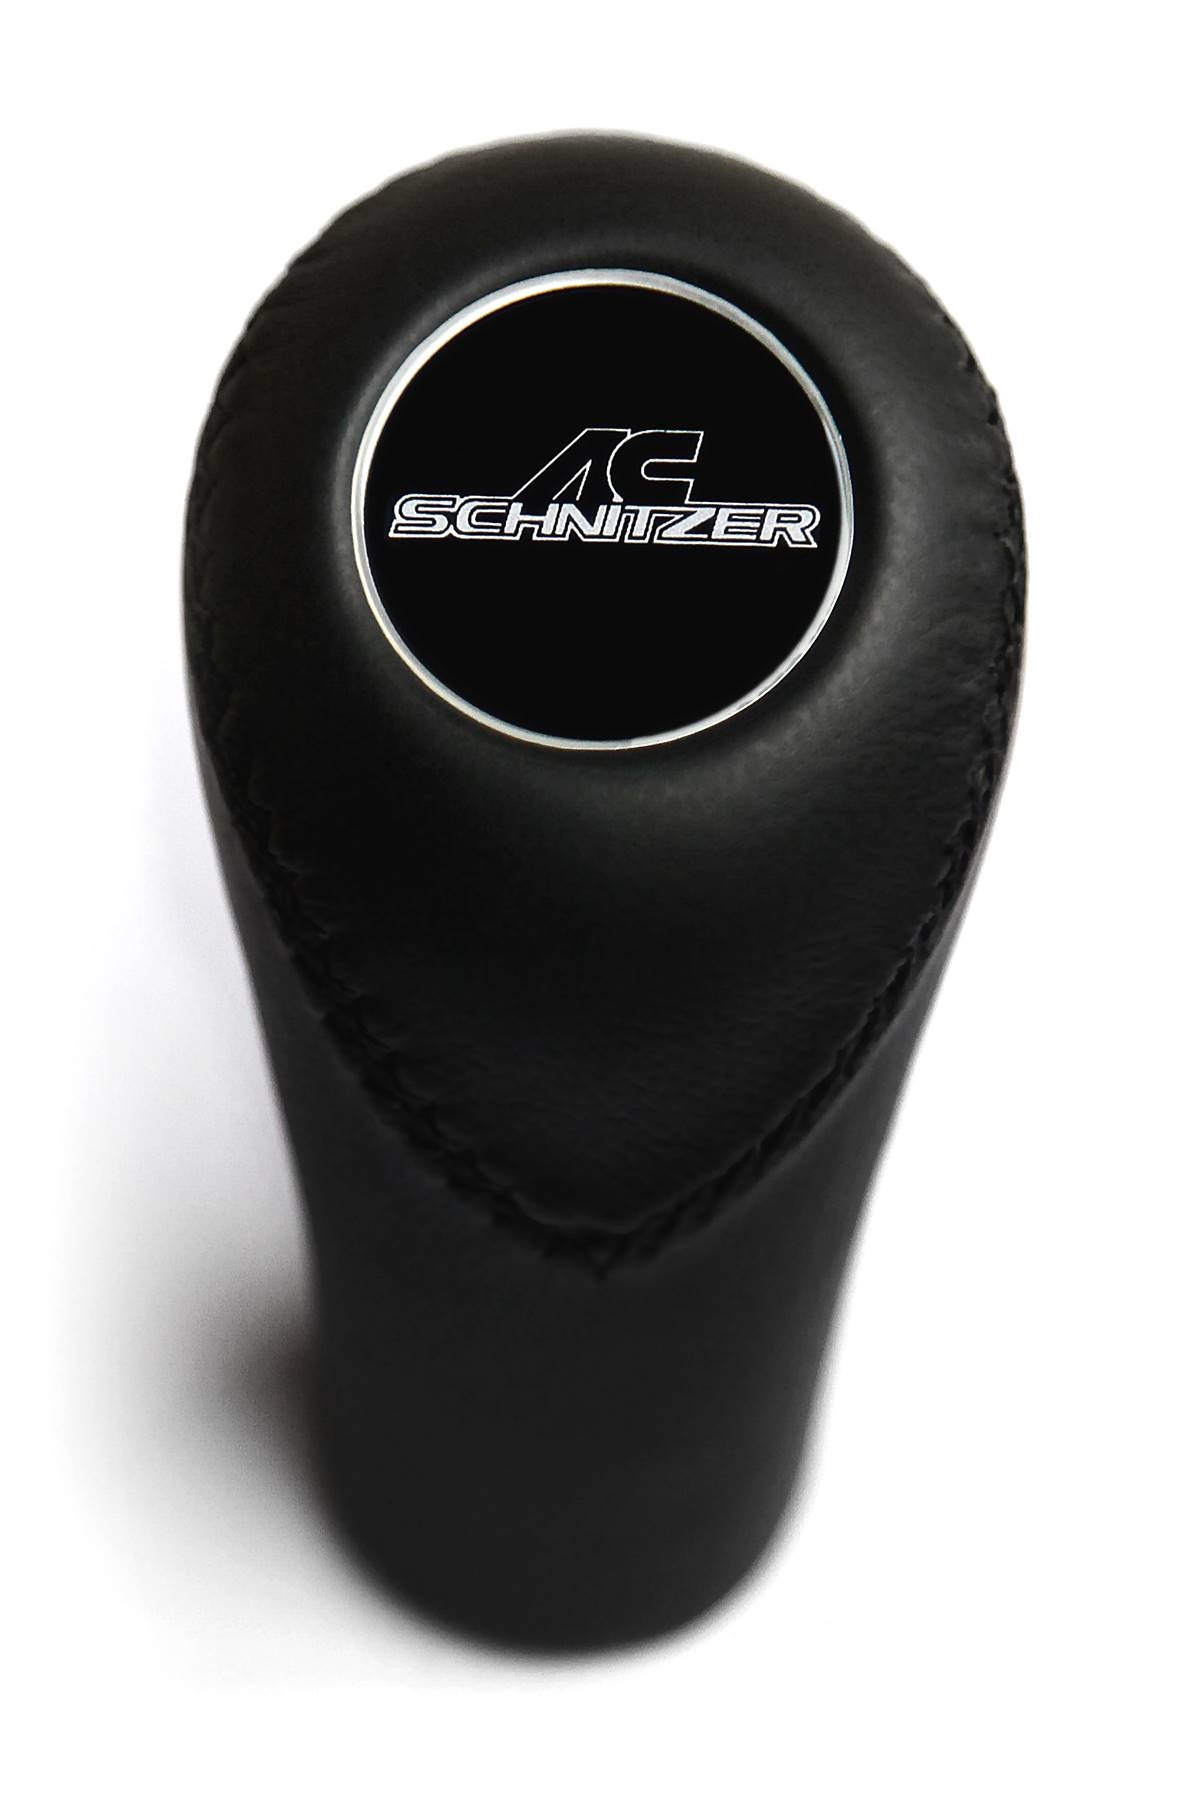 Gear Shift Knob For BMW 3 5 6 7 8 Series AC Schnitzer 4-5-6 Speed Manual  Transmission Genuine Leather Shifter Lever Push-in Type 